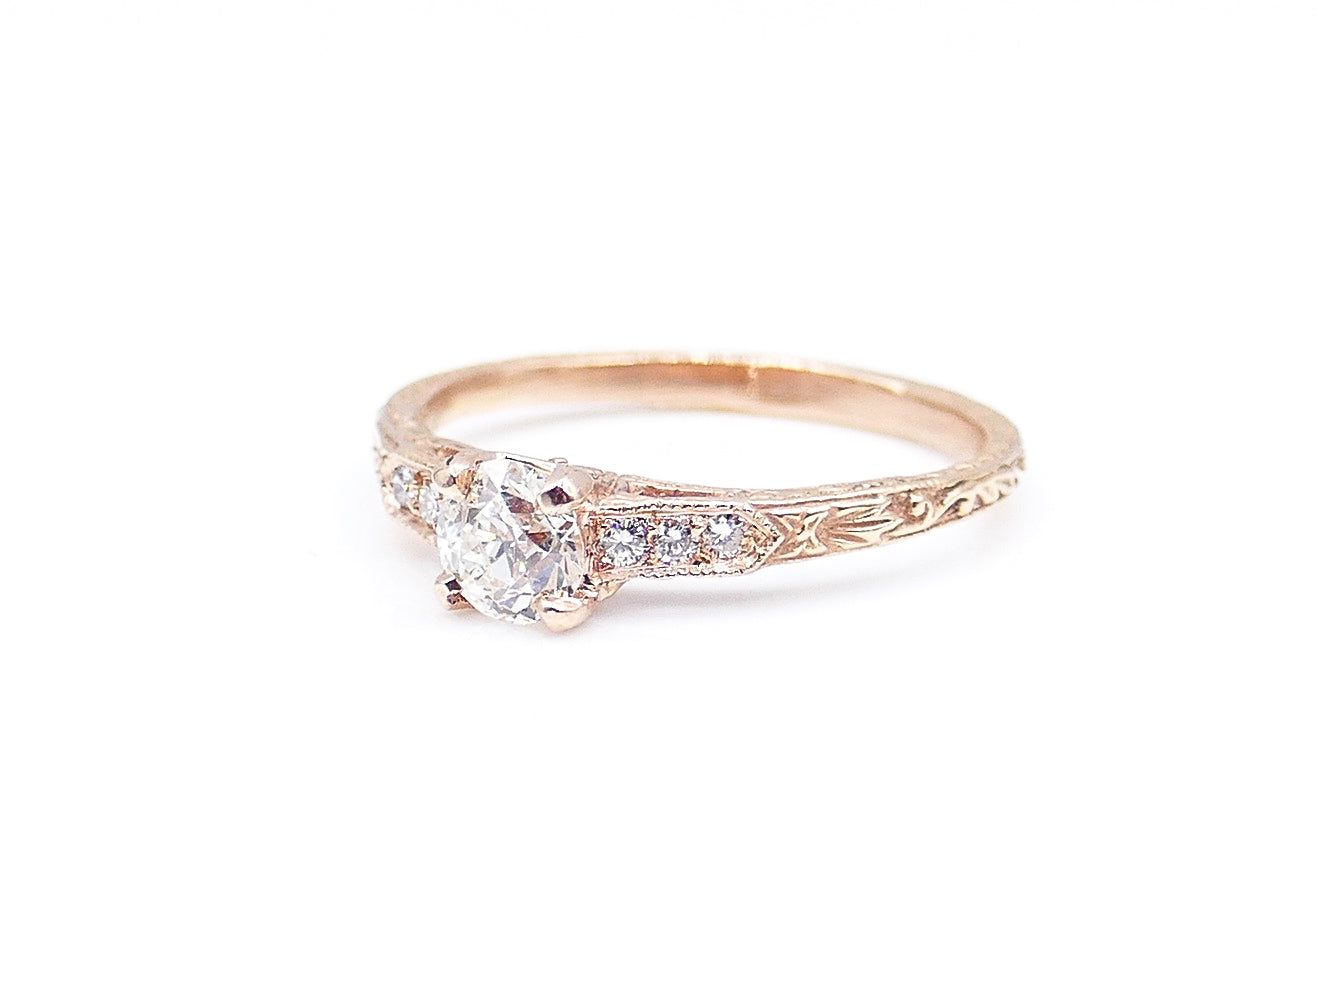 Custom Antique-Style Diamond and Rose Gold Engagement Ring